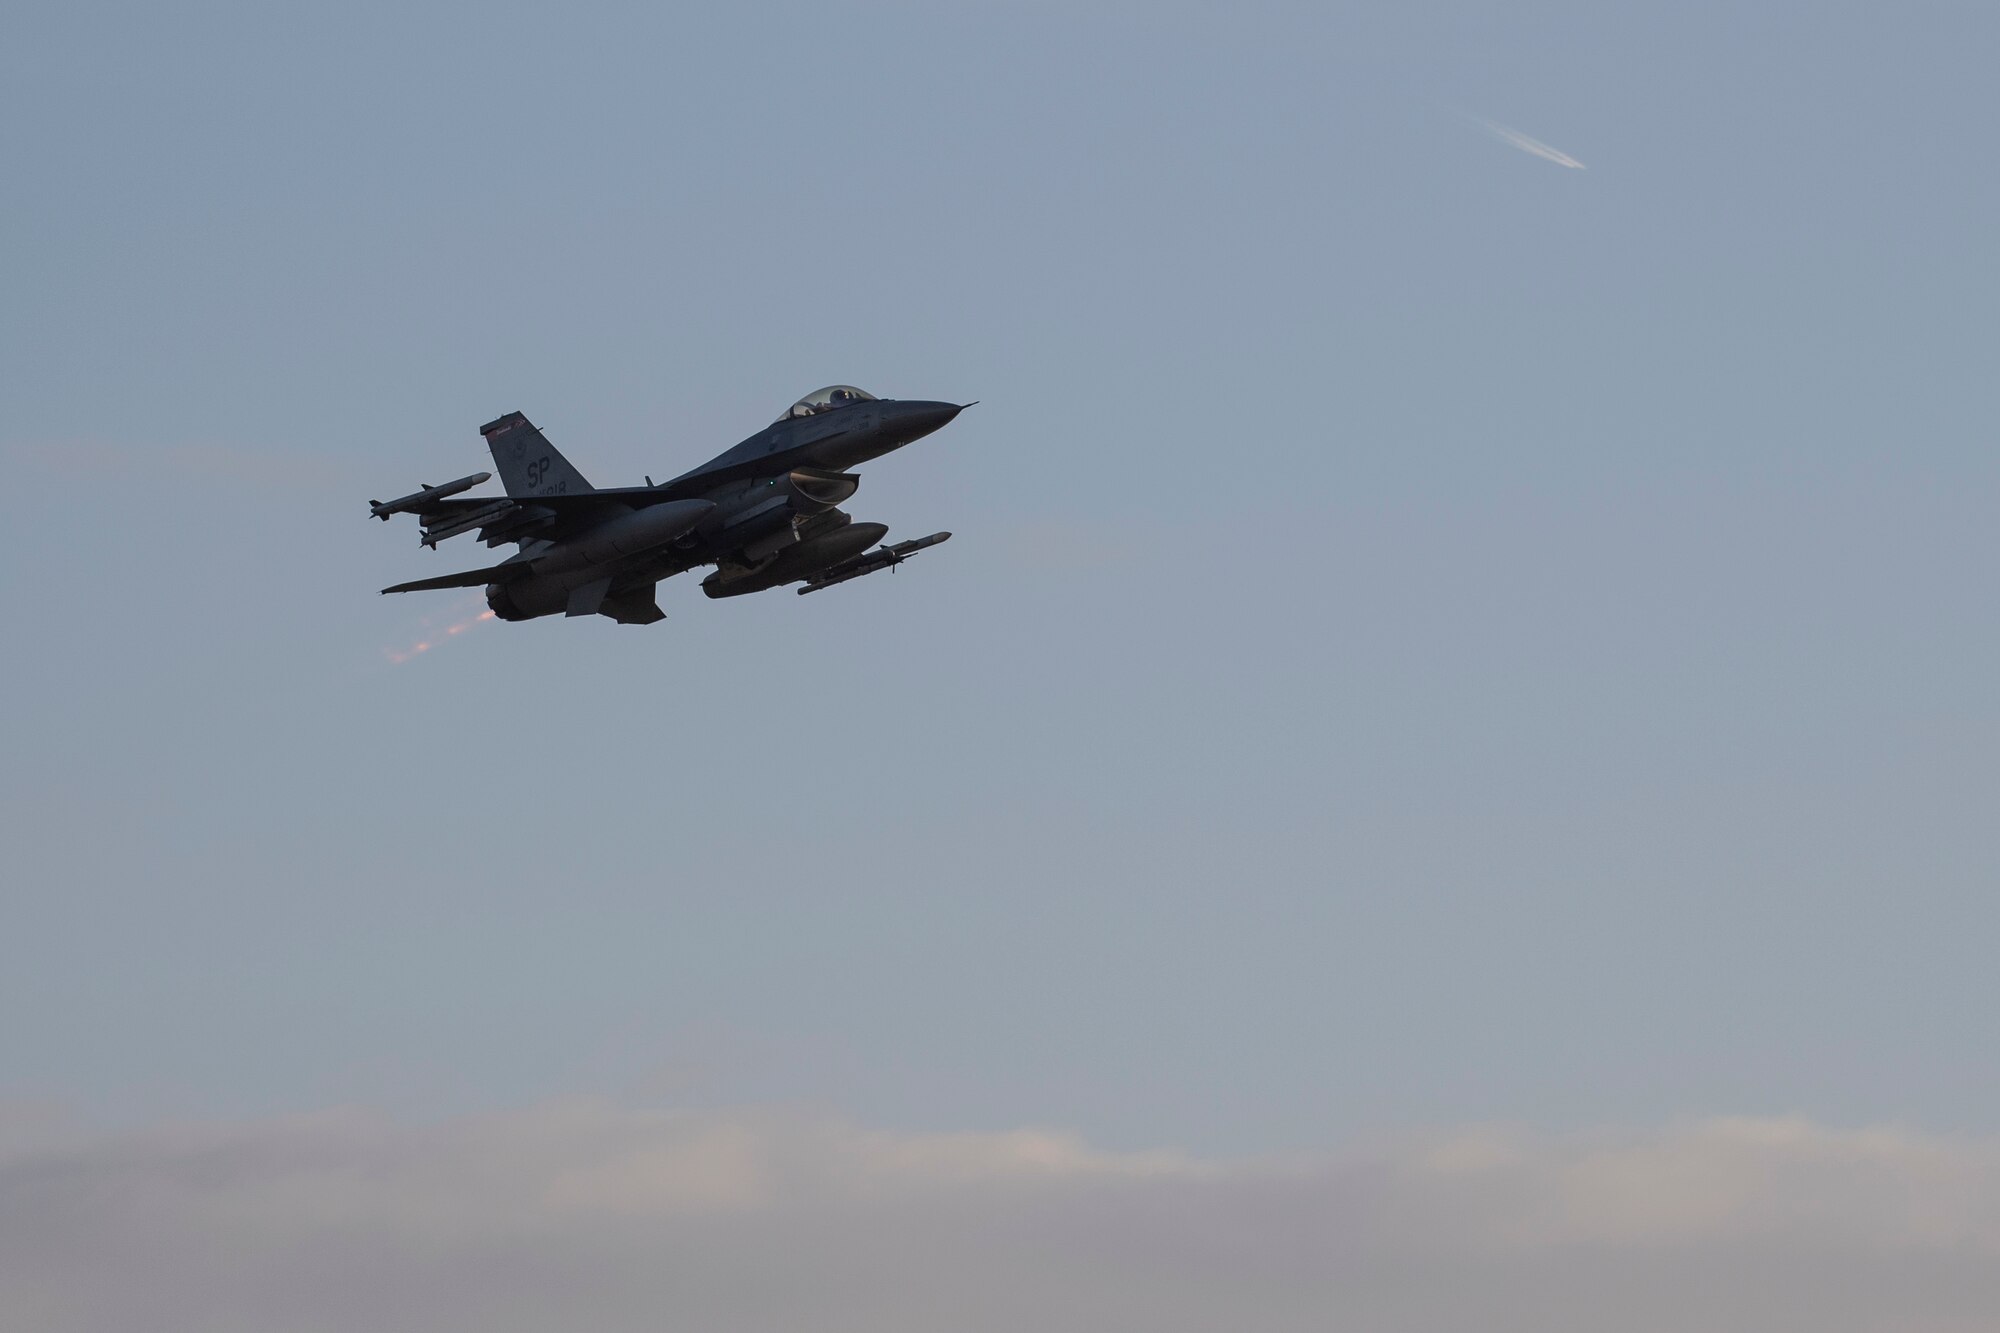 A U.S. Air Force F-16 Fighting Falcon, assigned to the 480th Fighter Squadron, takes off at Spangdahlem Air Base, Germany, Dec. 10, 2019. Spangdahlem F-16s participated in a multinational Allied Combat Lethality Exercise to strengthen U.S. Air Forces in Europe and NATO deterrence efforts. (U.S. Air Force photo by Airman 1st Class Valerie Seelye)